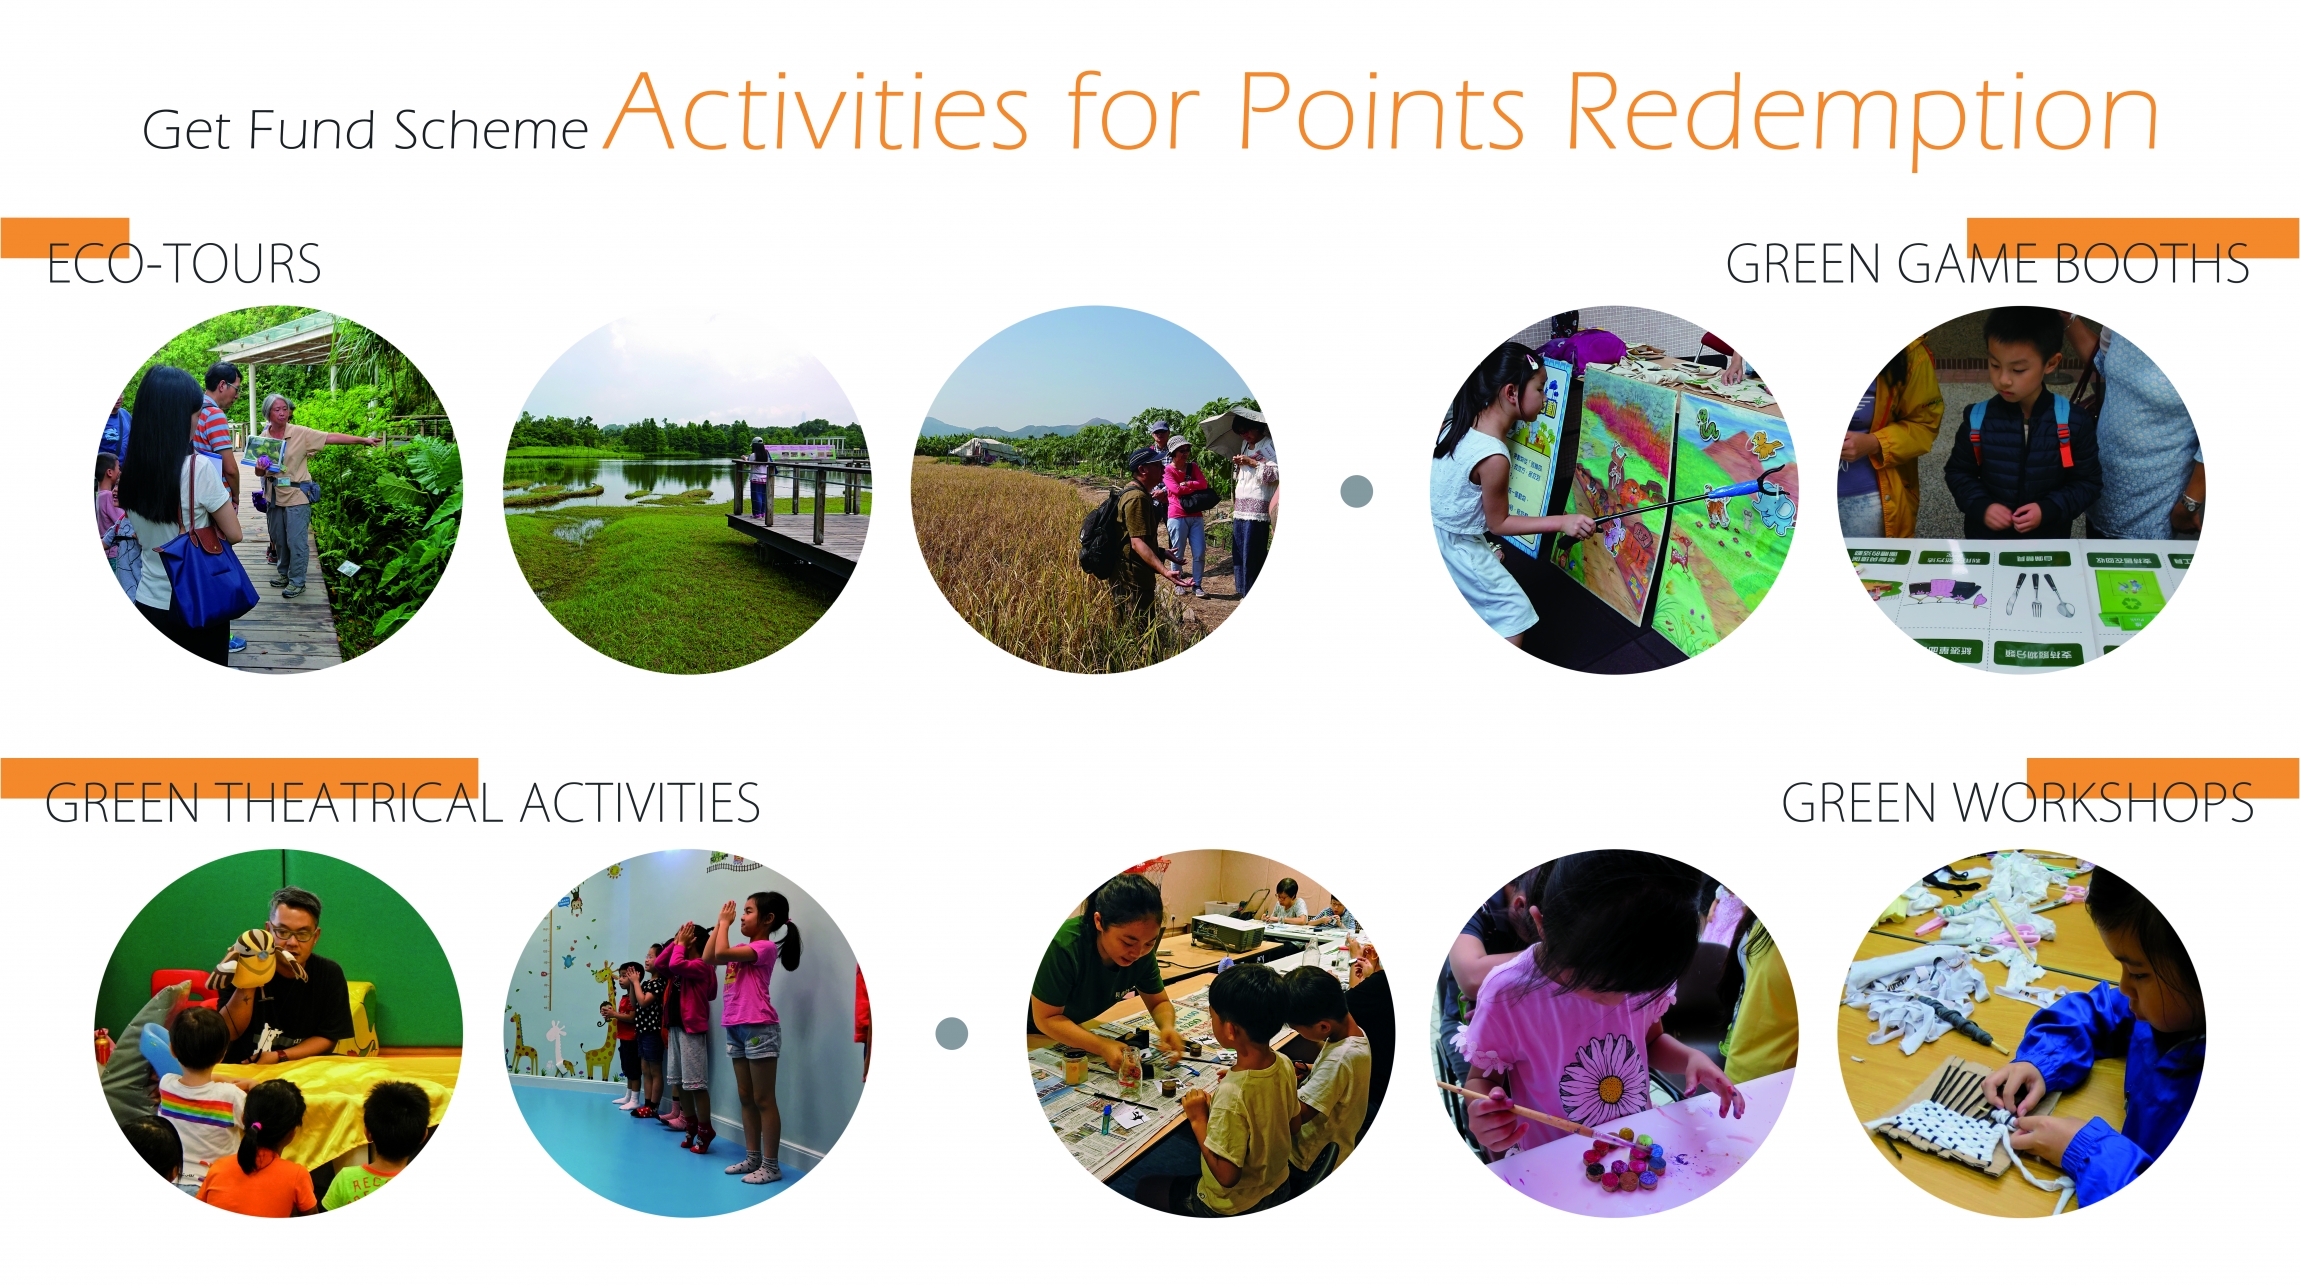 Get Fund Acheme Activities for Points Redemption: Eco-Tours, Green Game Booths, Green Theatrical Activities, Green Workshops